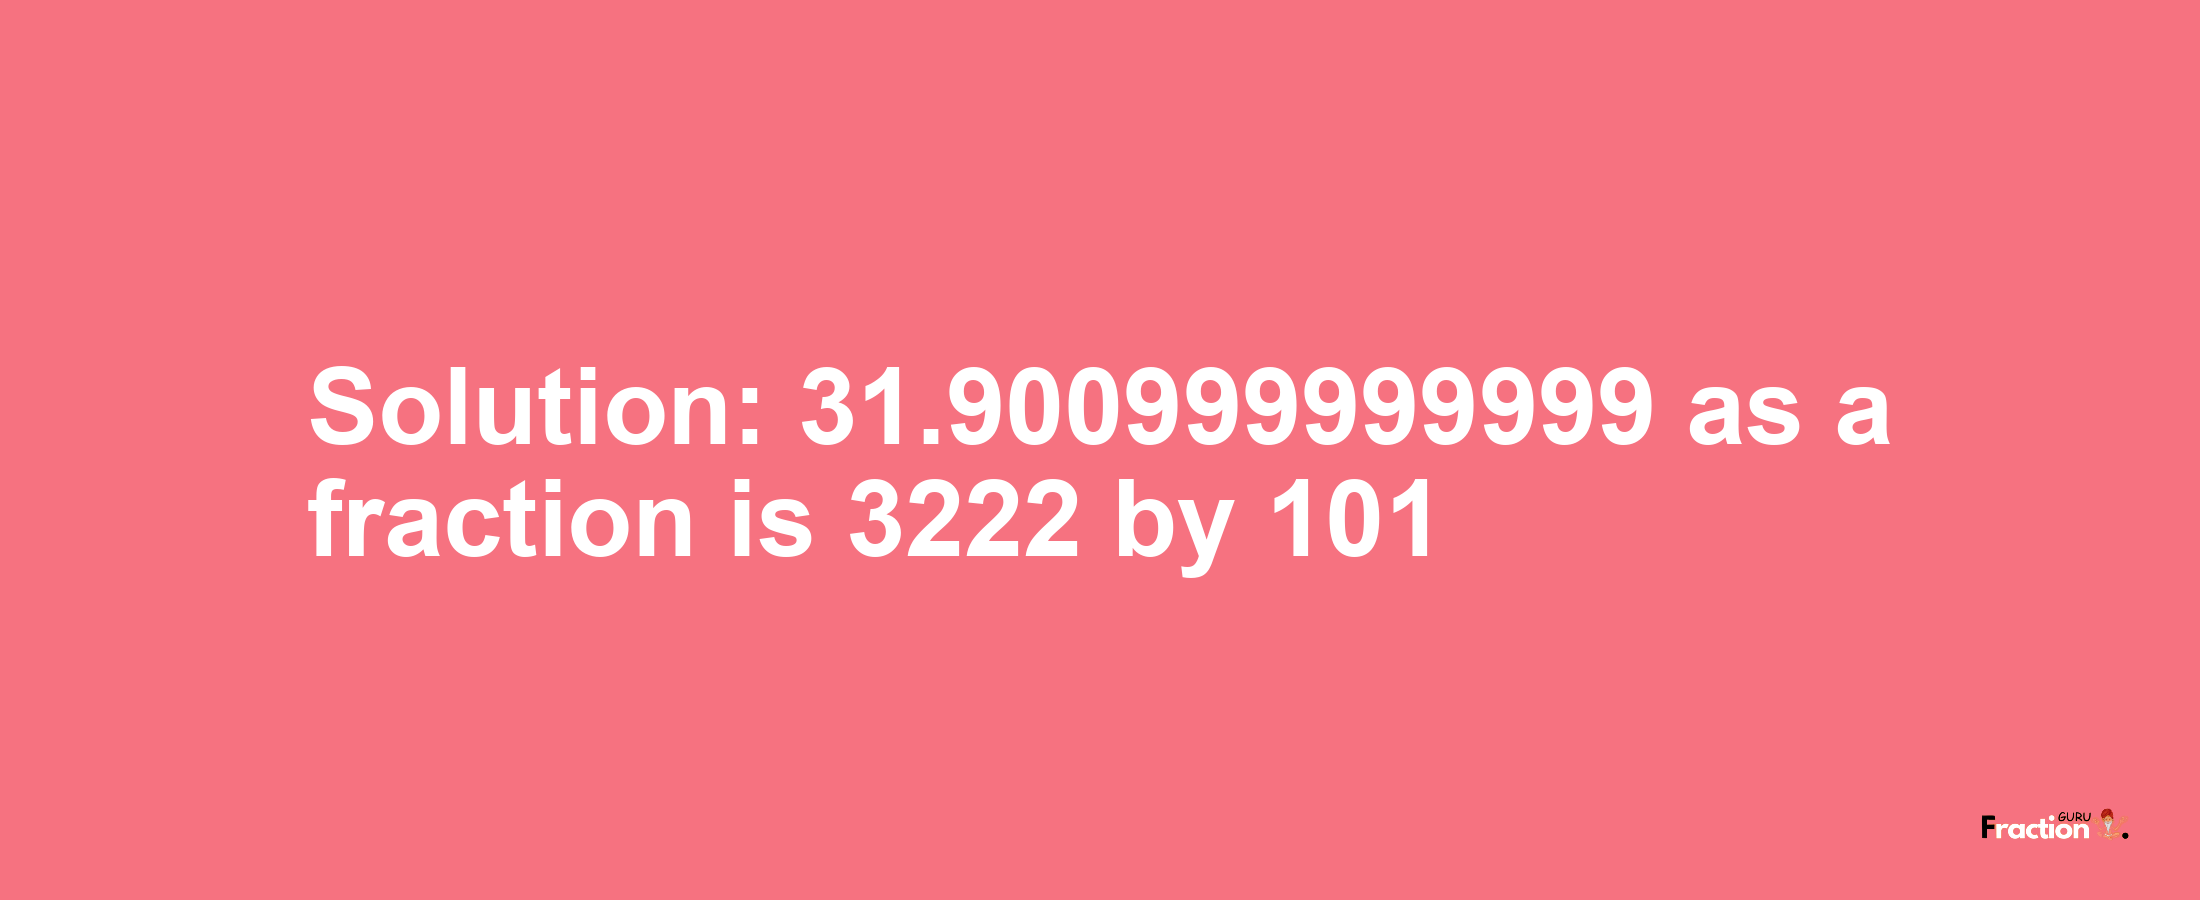 Solution:31.900999999999 as a fraction is 3222/101